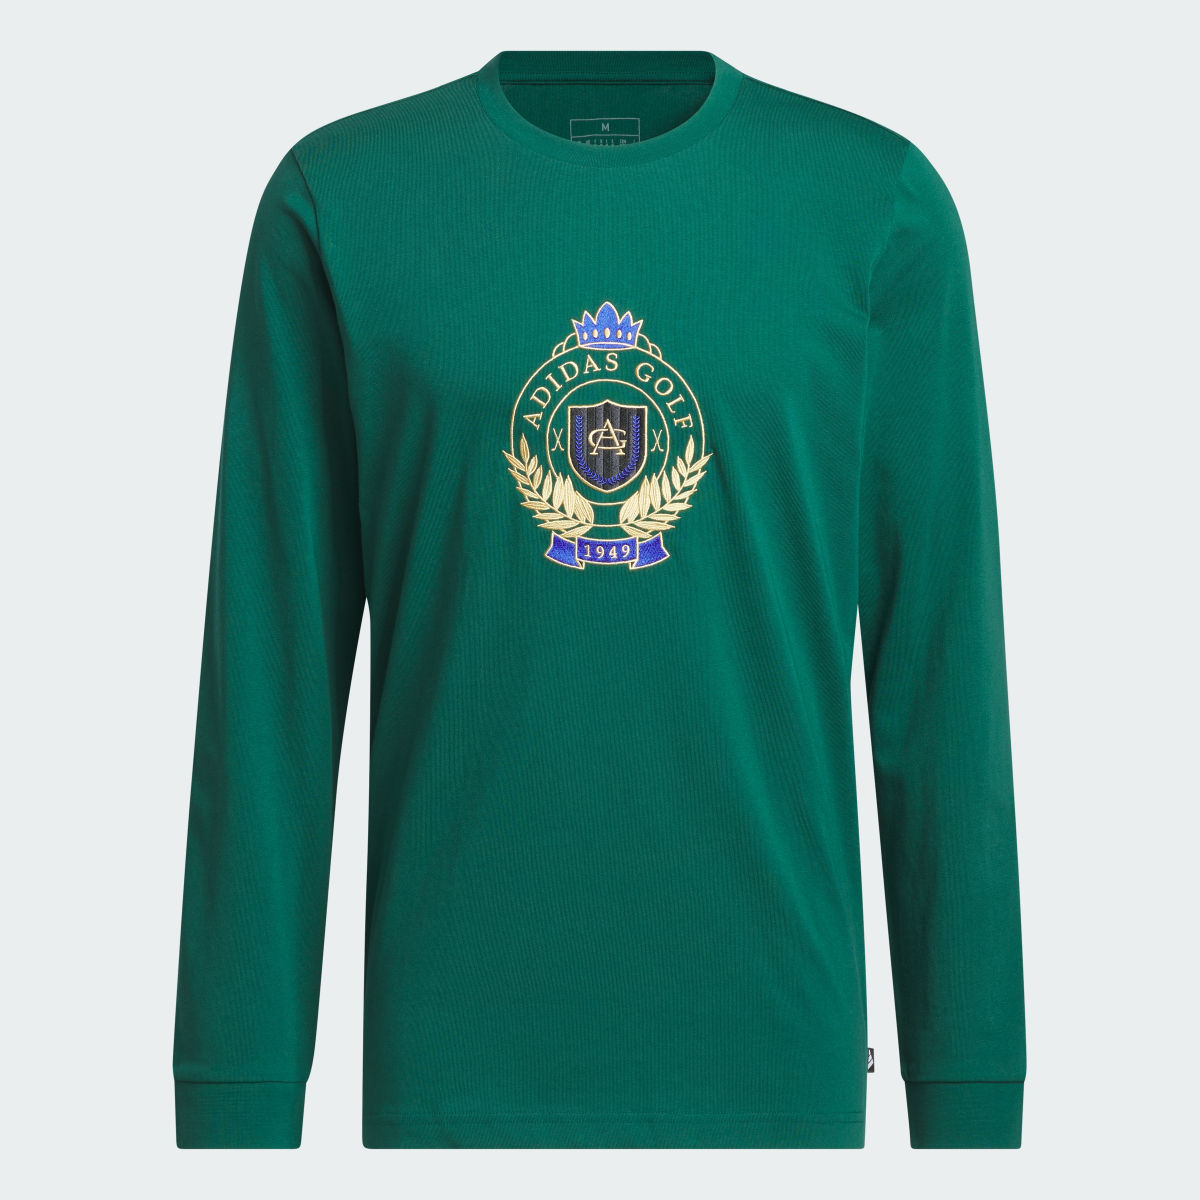 Adidas Go-To Crest Graphic Longsleeve. 7